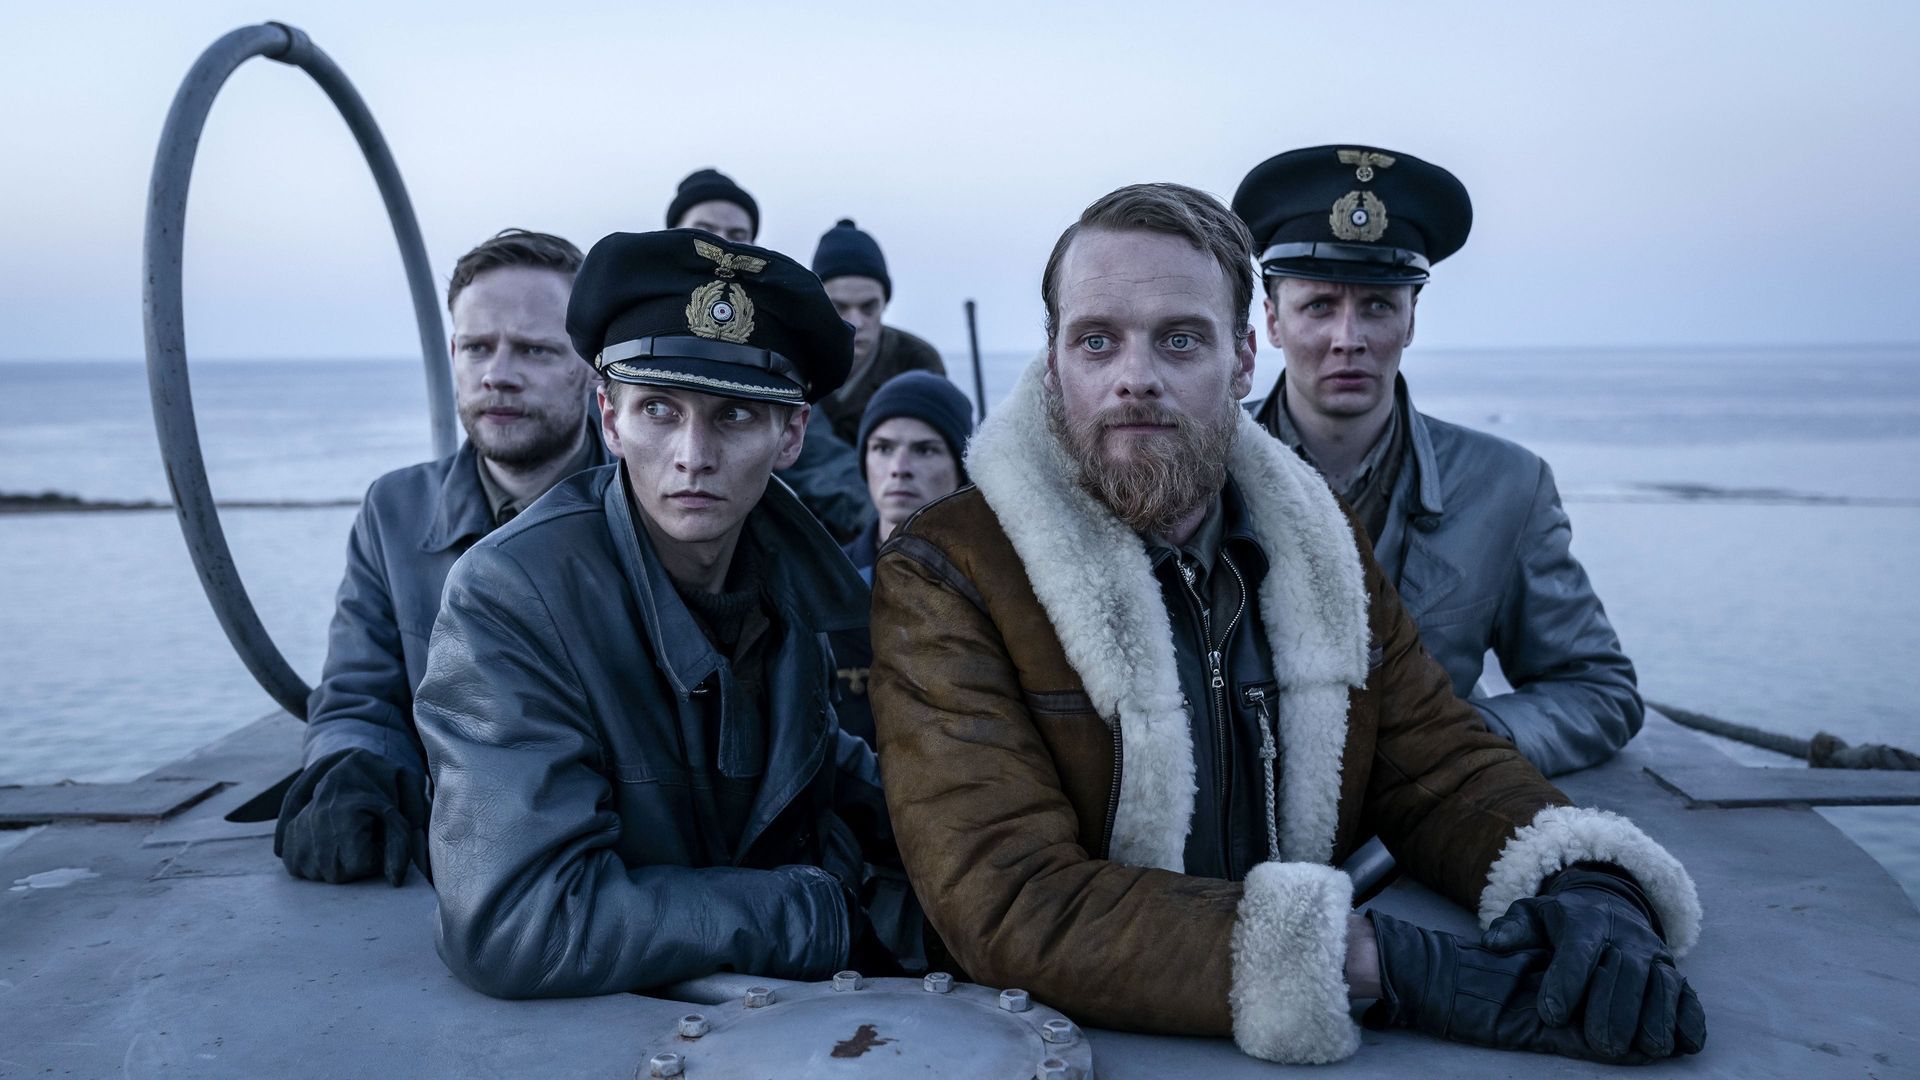 Das Boot season 2 release date: How many episodes are in Das Boot